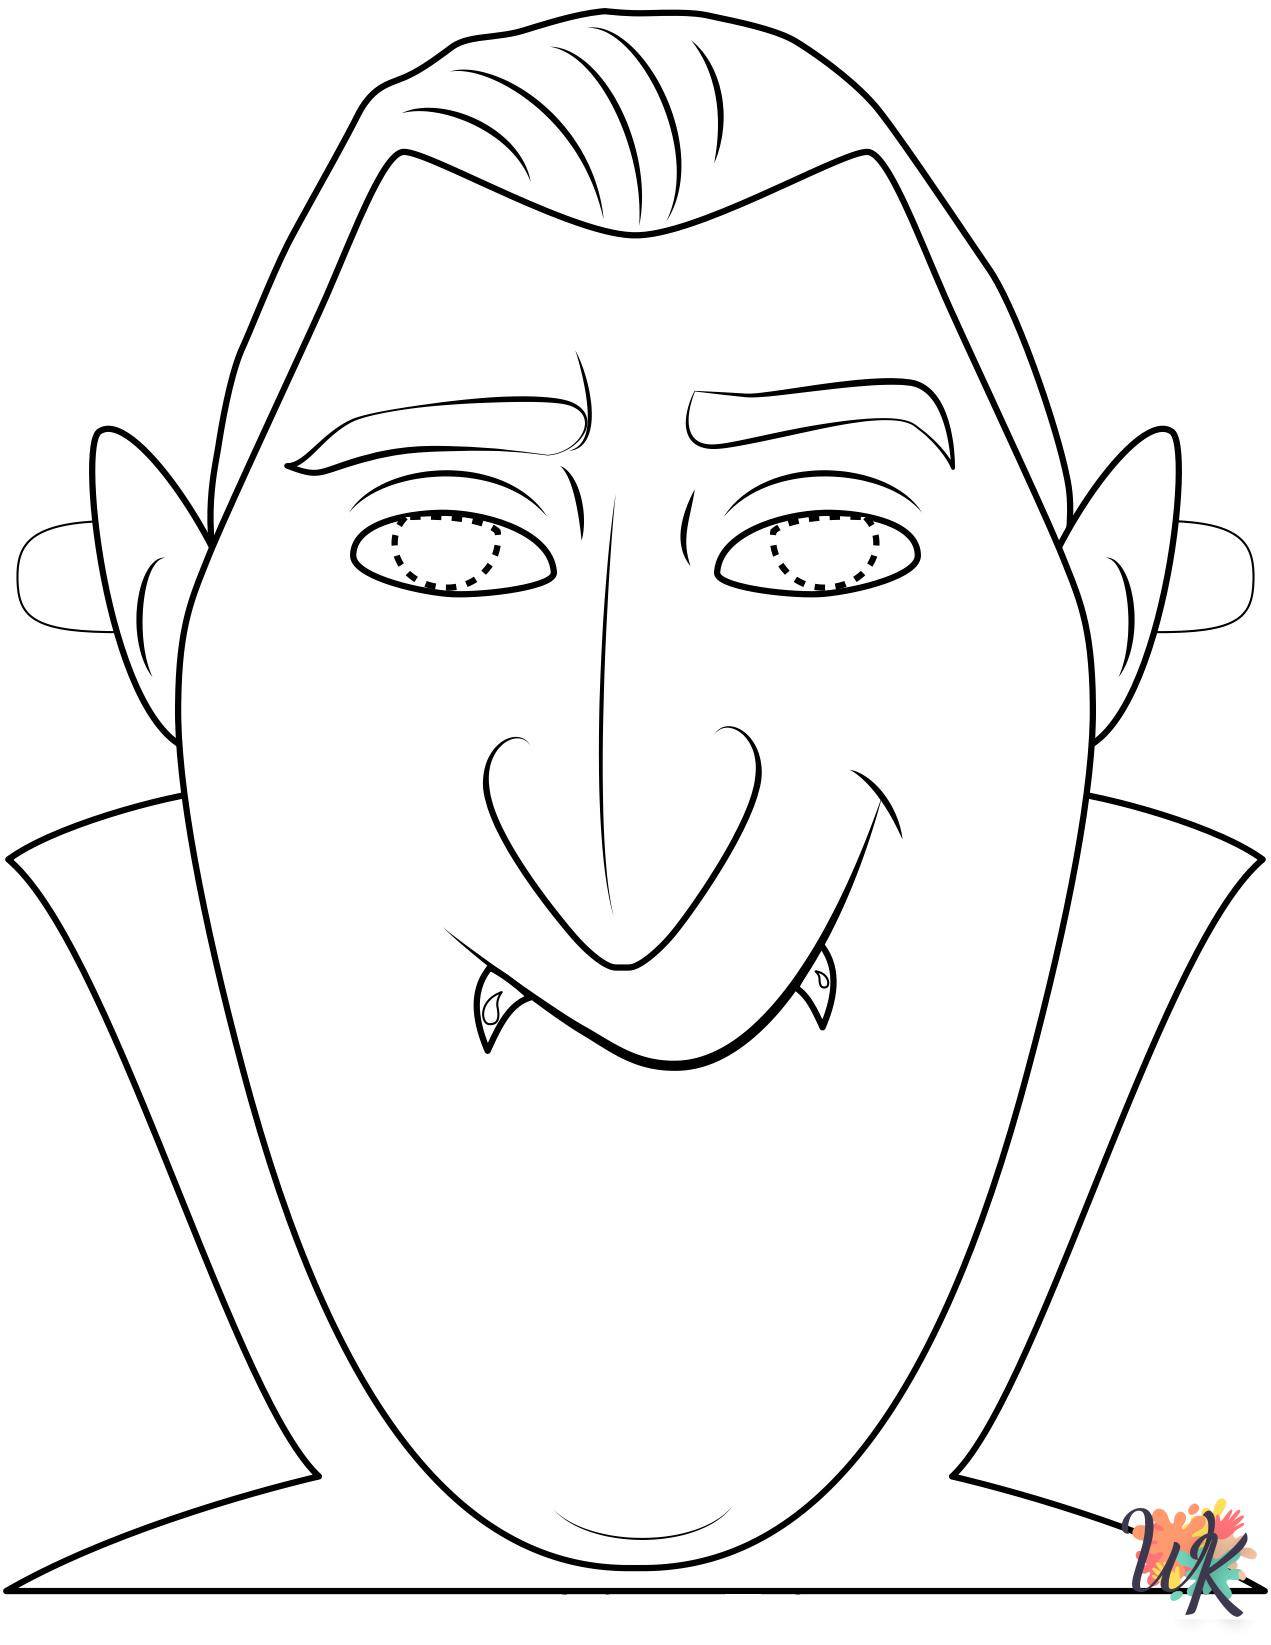 Dracula coloring pages for adults easy